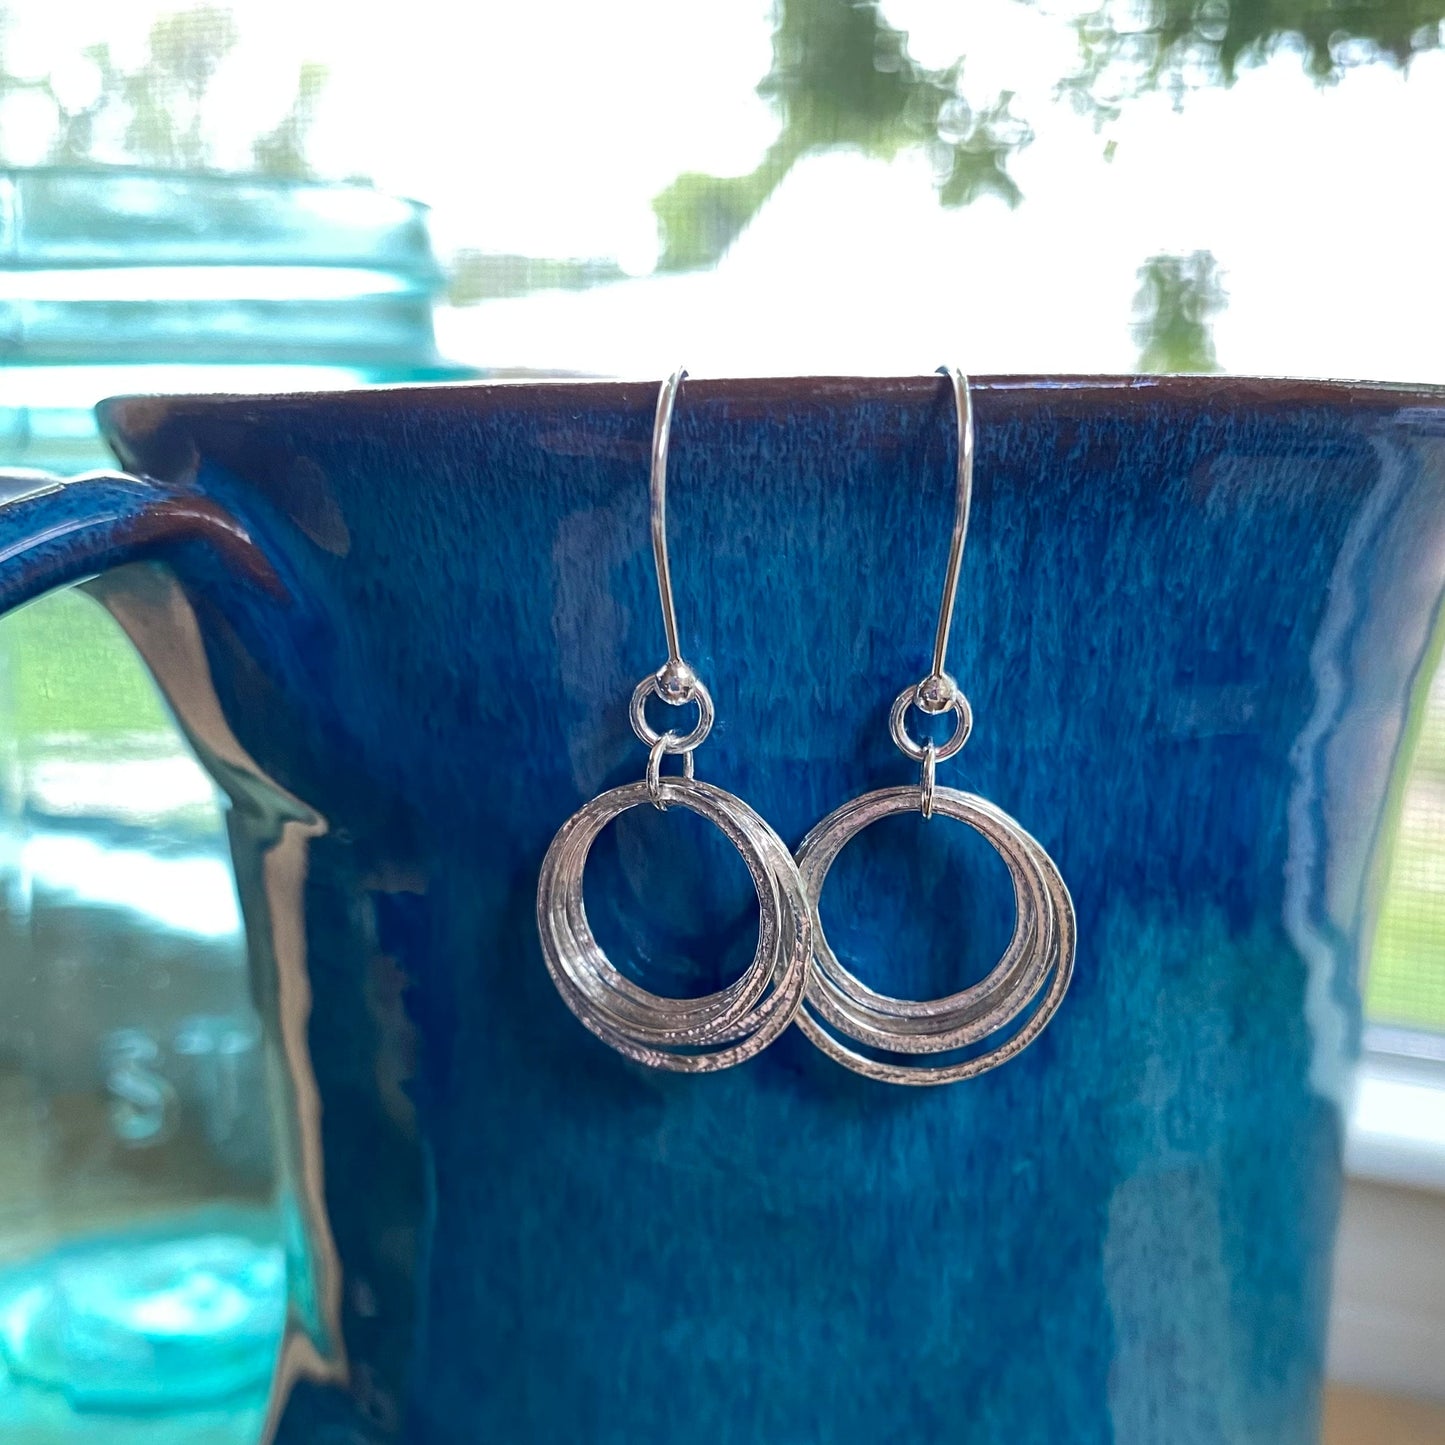 50th Birthday Earrings, Sterling Silver 5 Circles Small Hoops, Sparkly Textured Flat 5 Rings for 5 Decades, Elegant Birthday Gift for Her